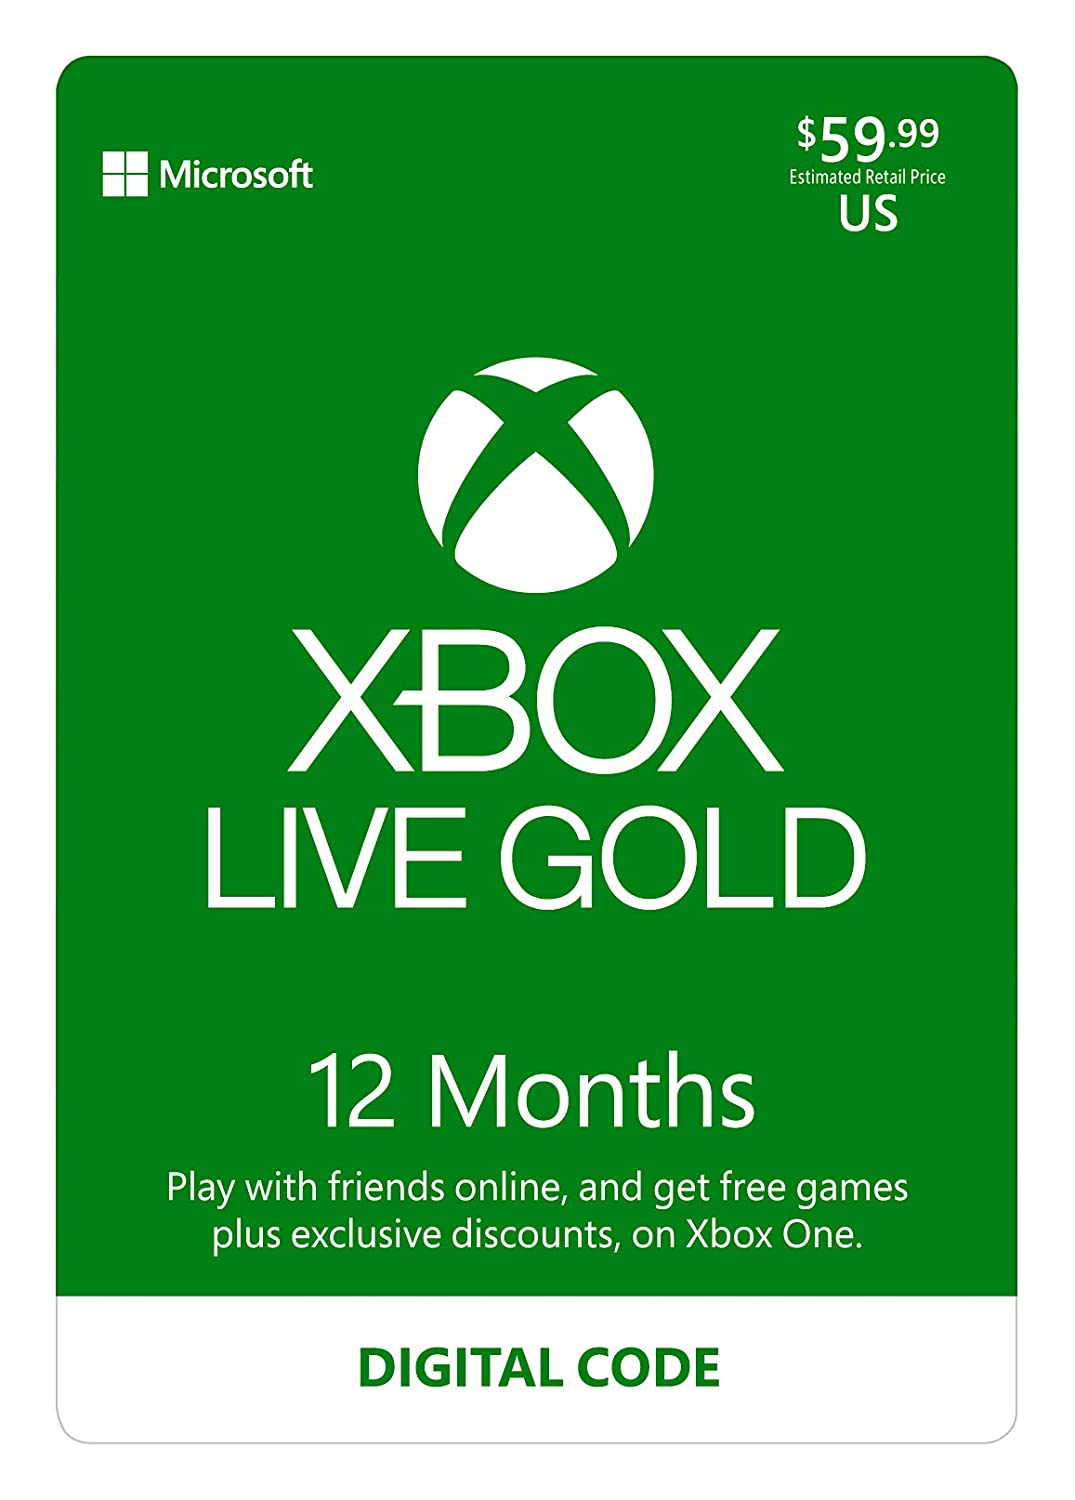 Xbox Live Gold, The great price hike of 2021!